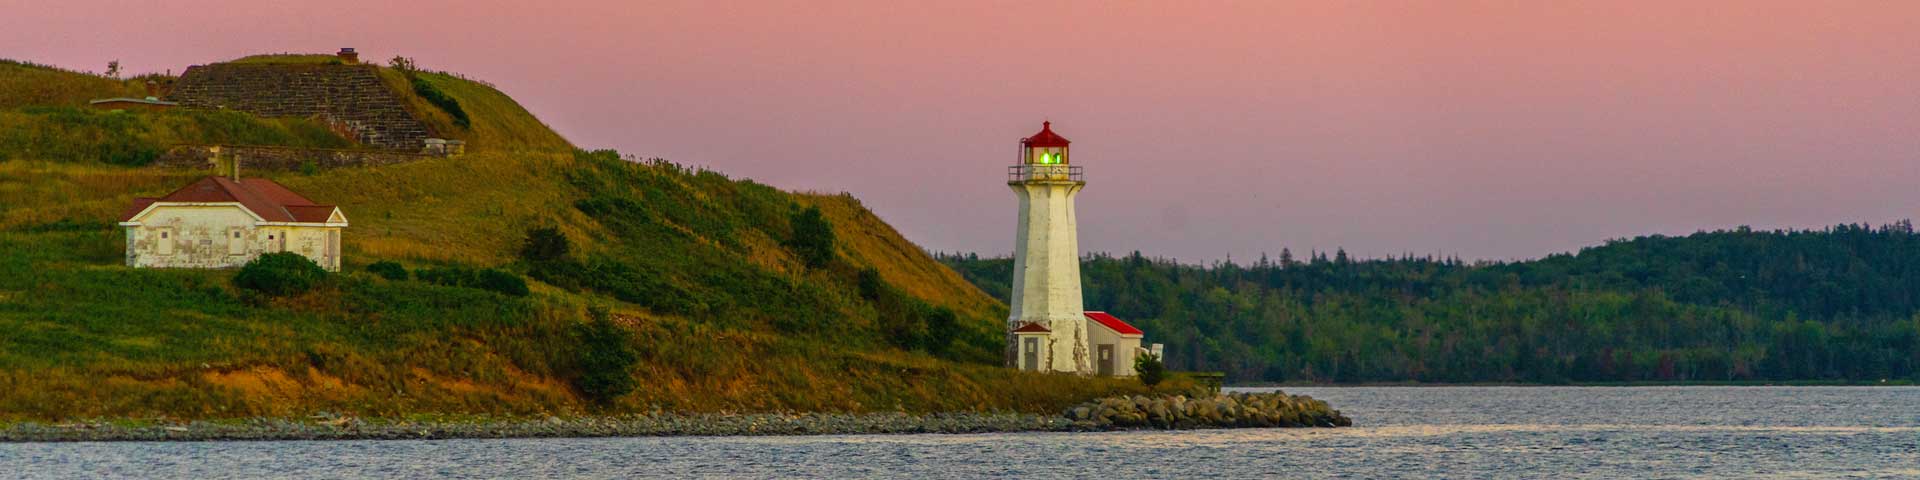 The lighthouse on Georges Island.